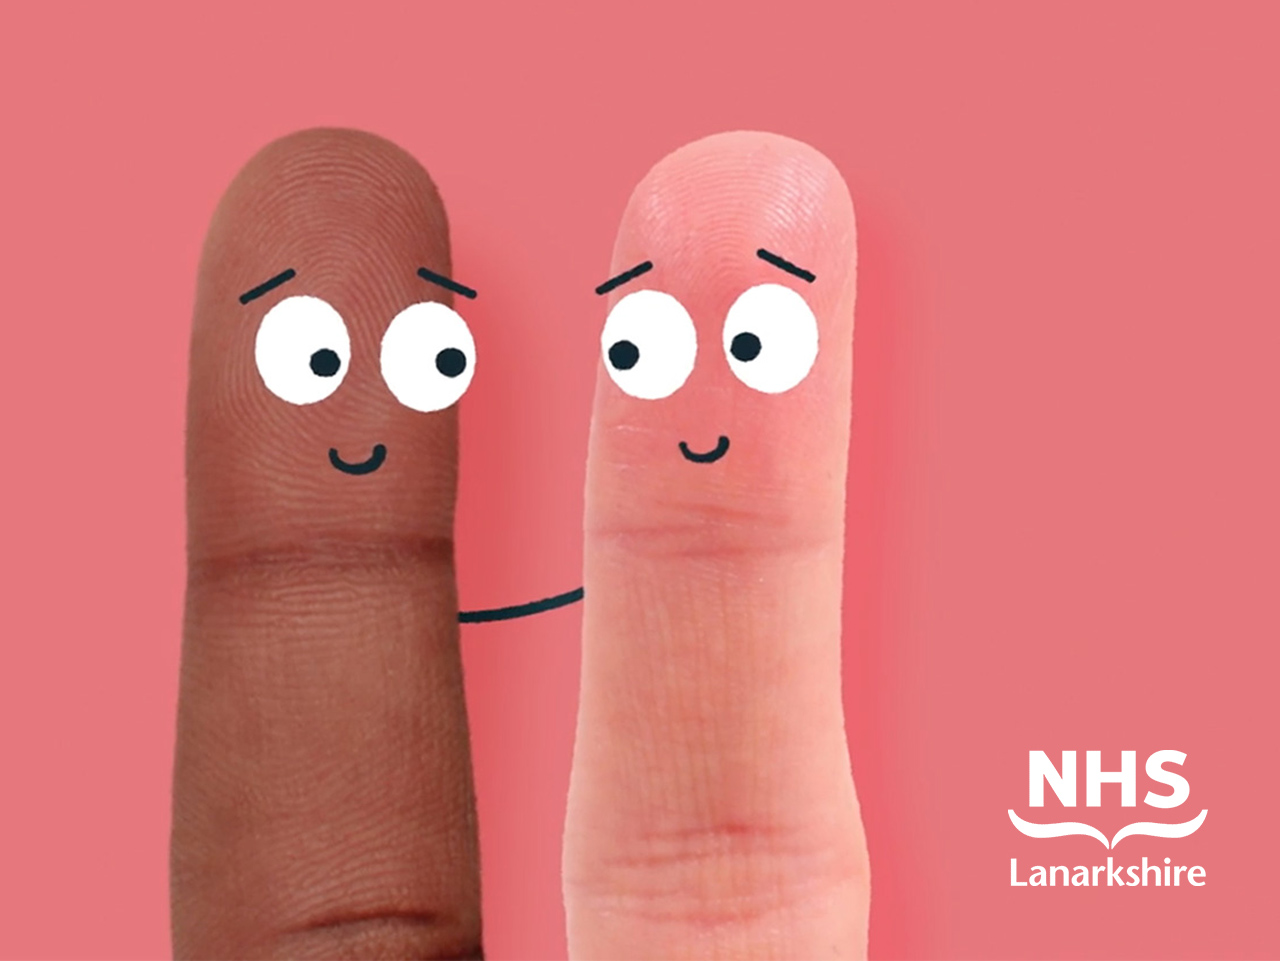 NHS HIV Fingers featured image